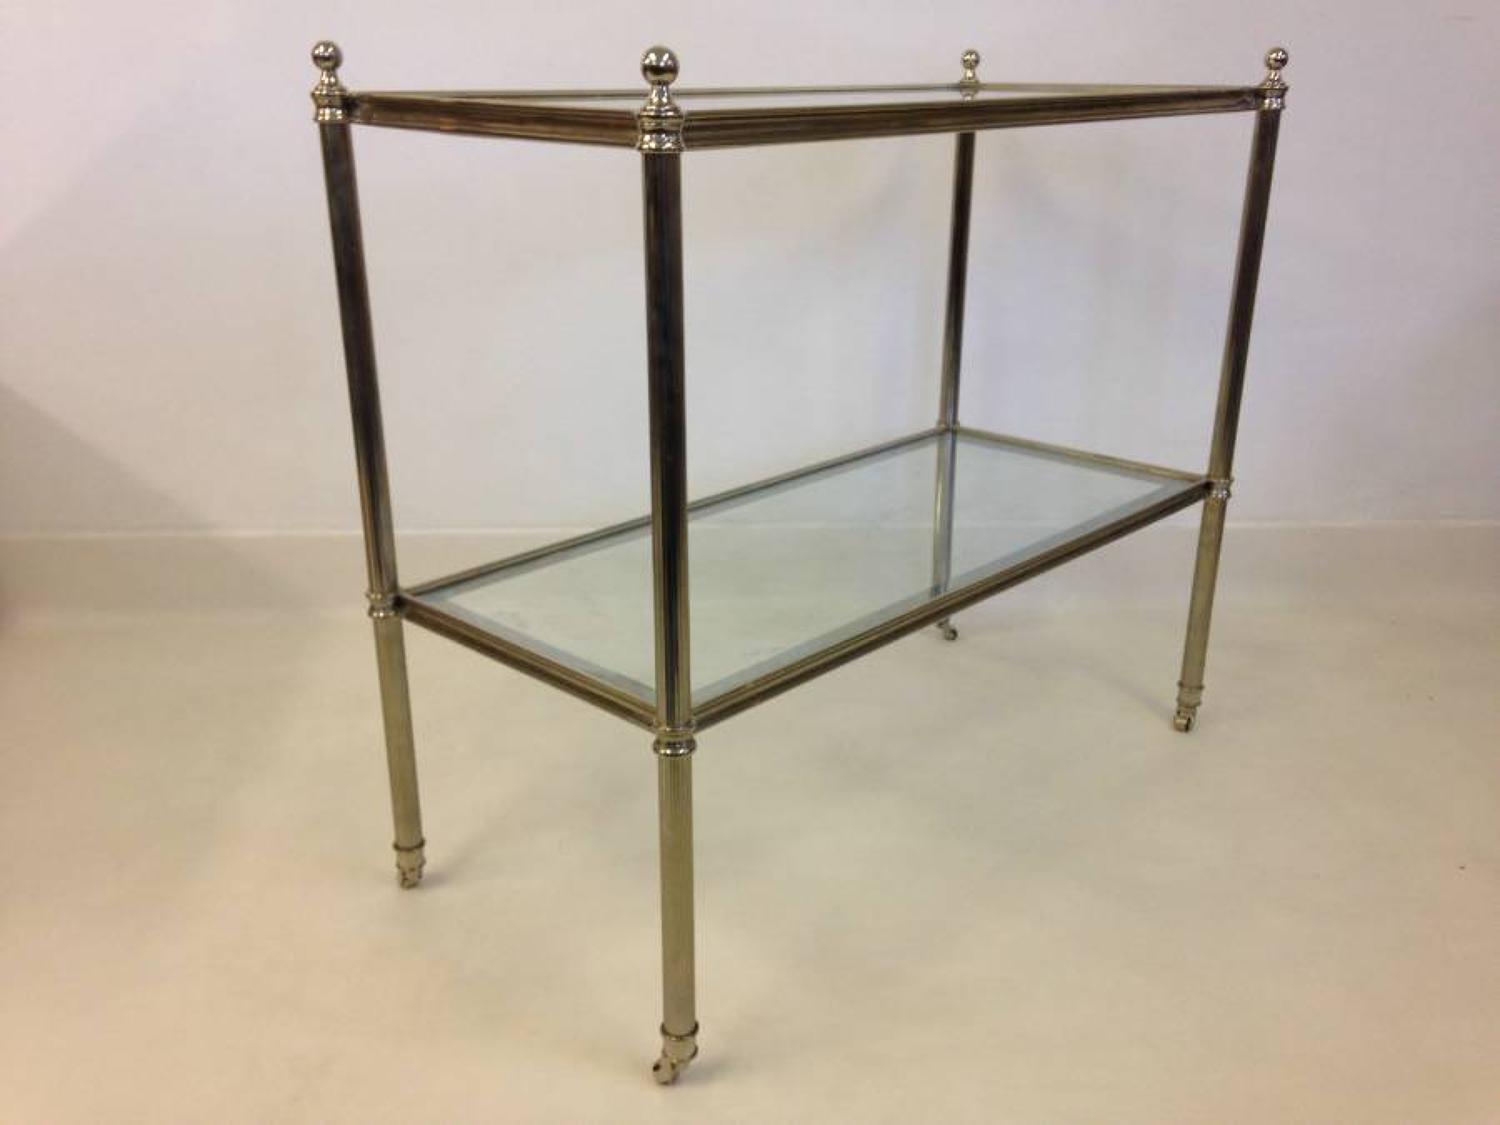 Two tier chrome table or trolley